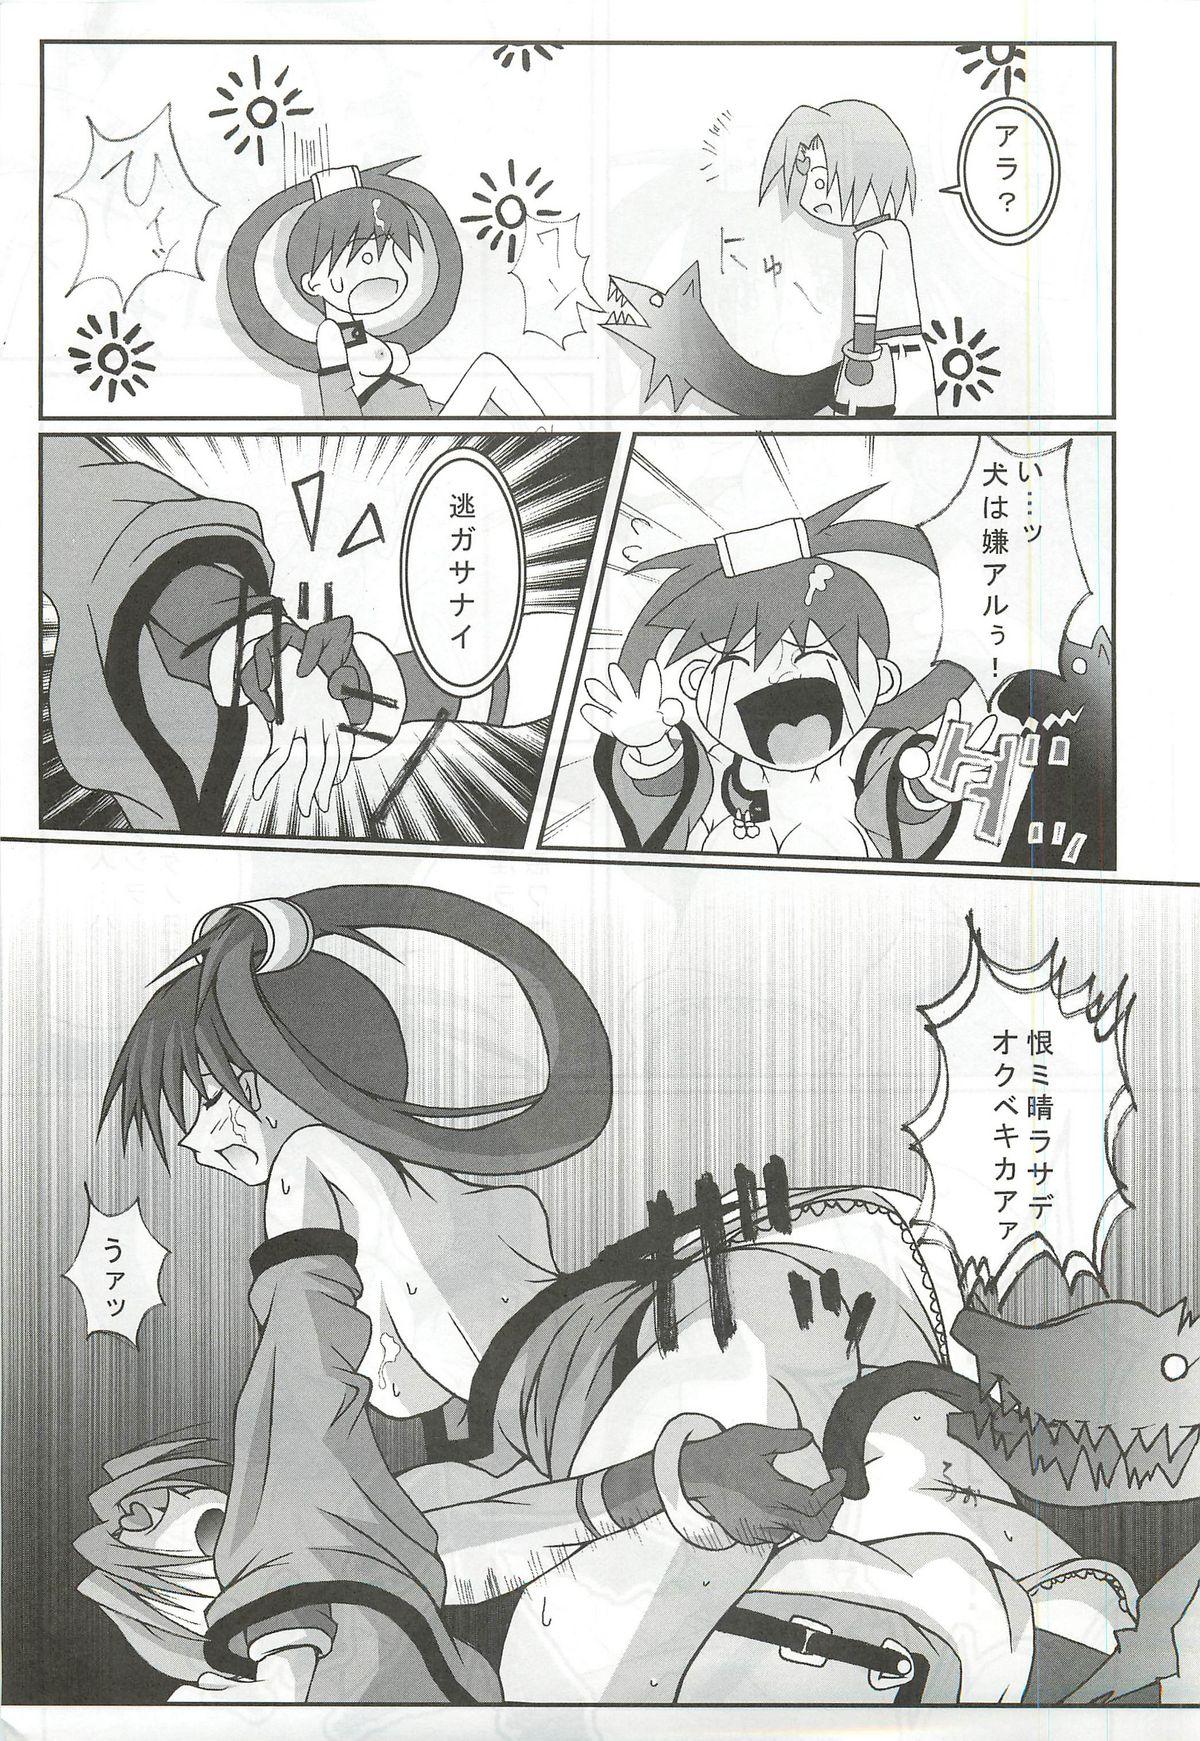 Vietnamese Passionless 2 - Guilty gear Affair - Page 8